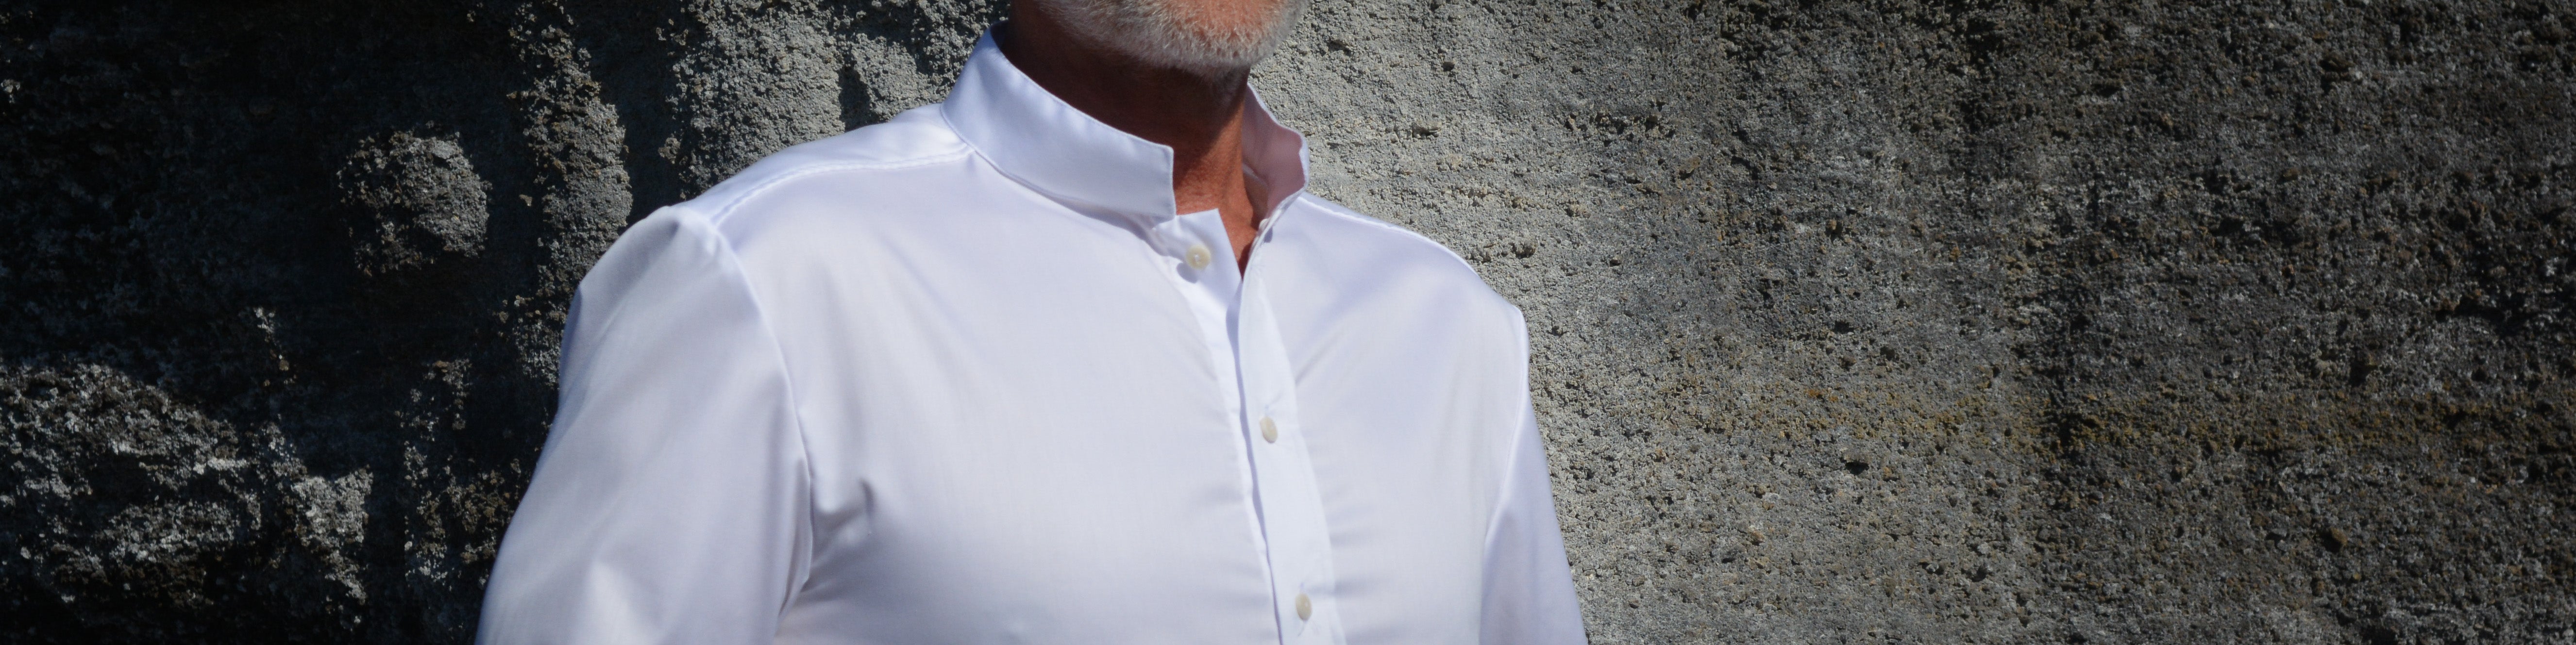 The Shirt - Stand Up Collar - WHITE